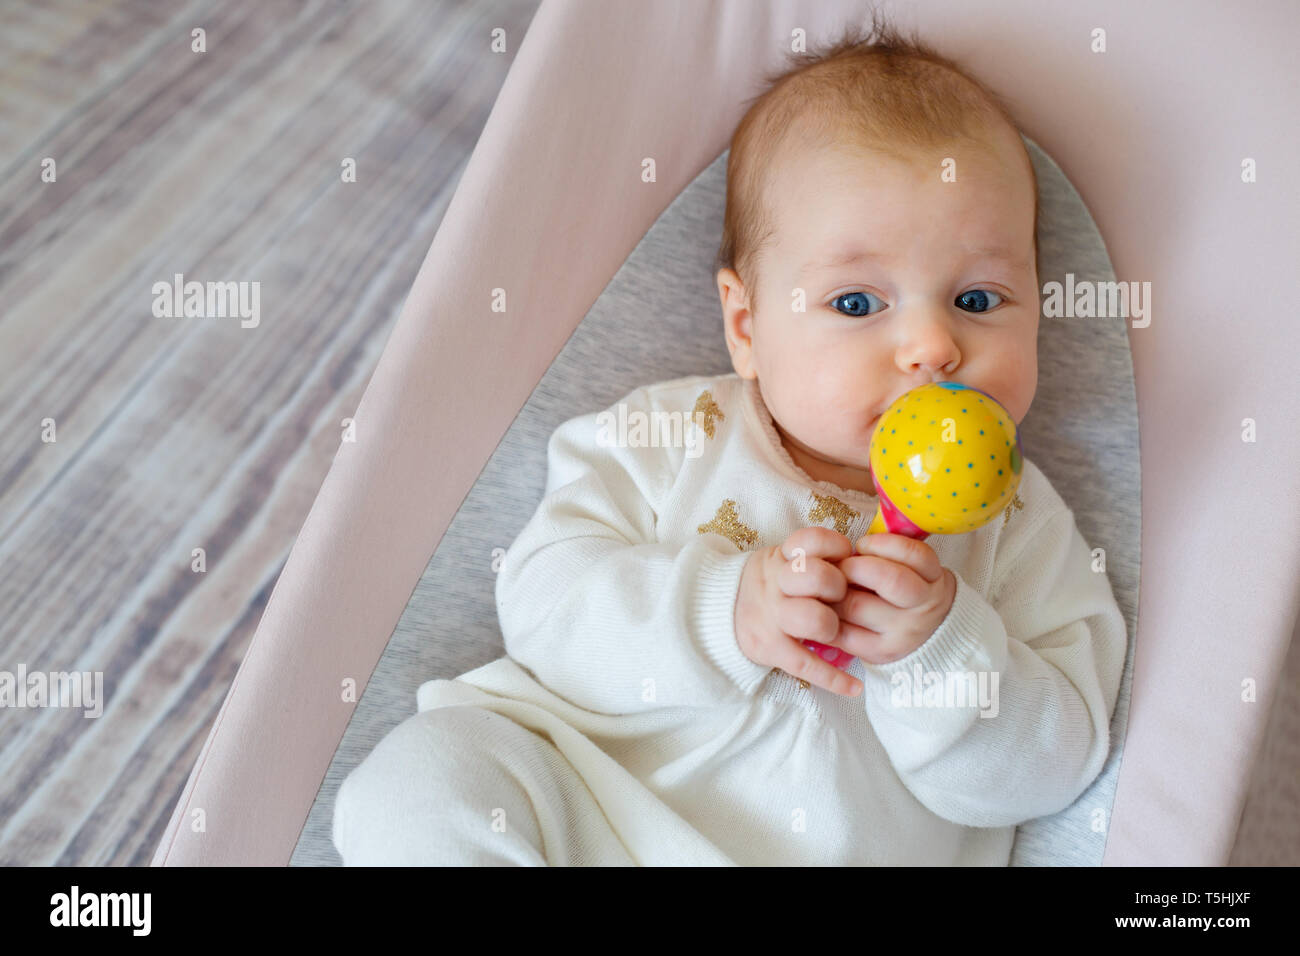 Adorable baby girl having fun in bouncer. Toddler playing with colorful rattle toy indoors. Activities for infants Stock Photo